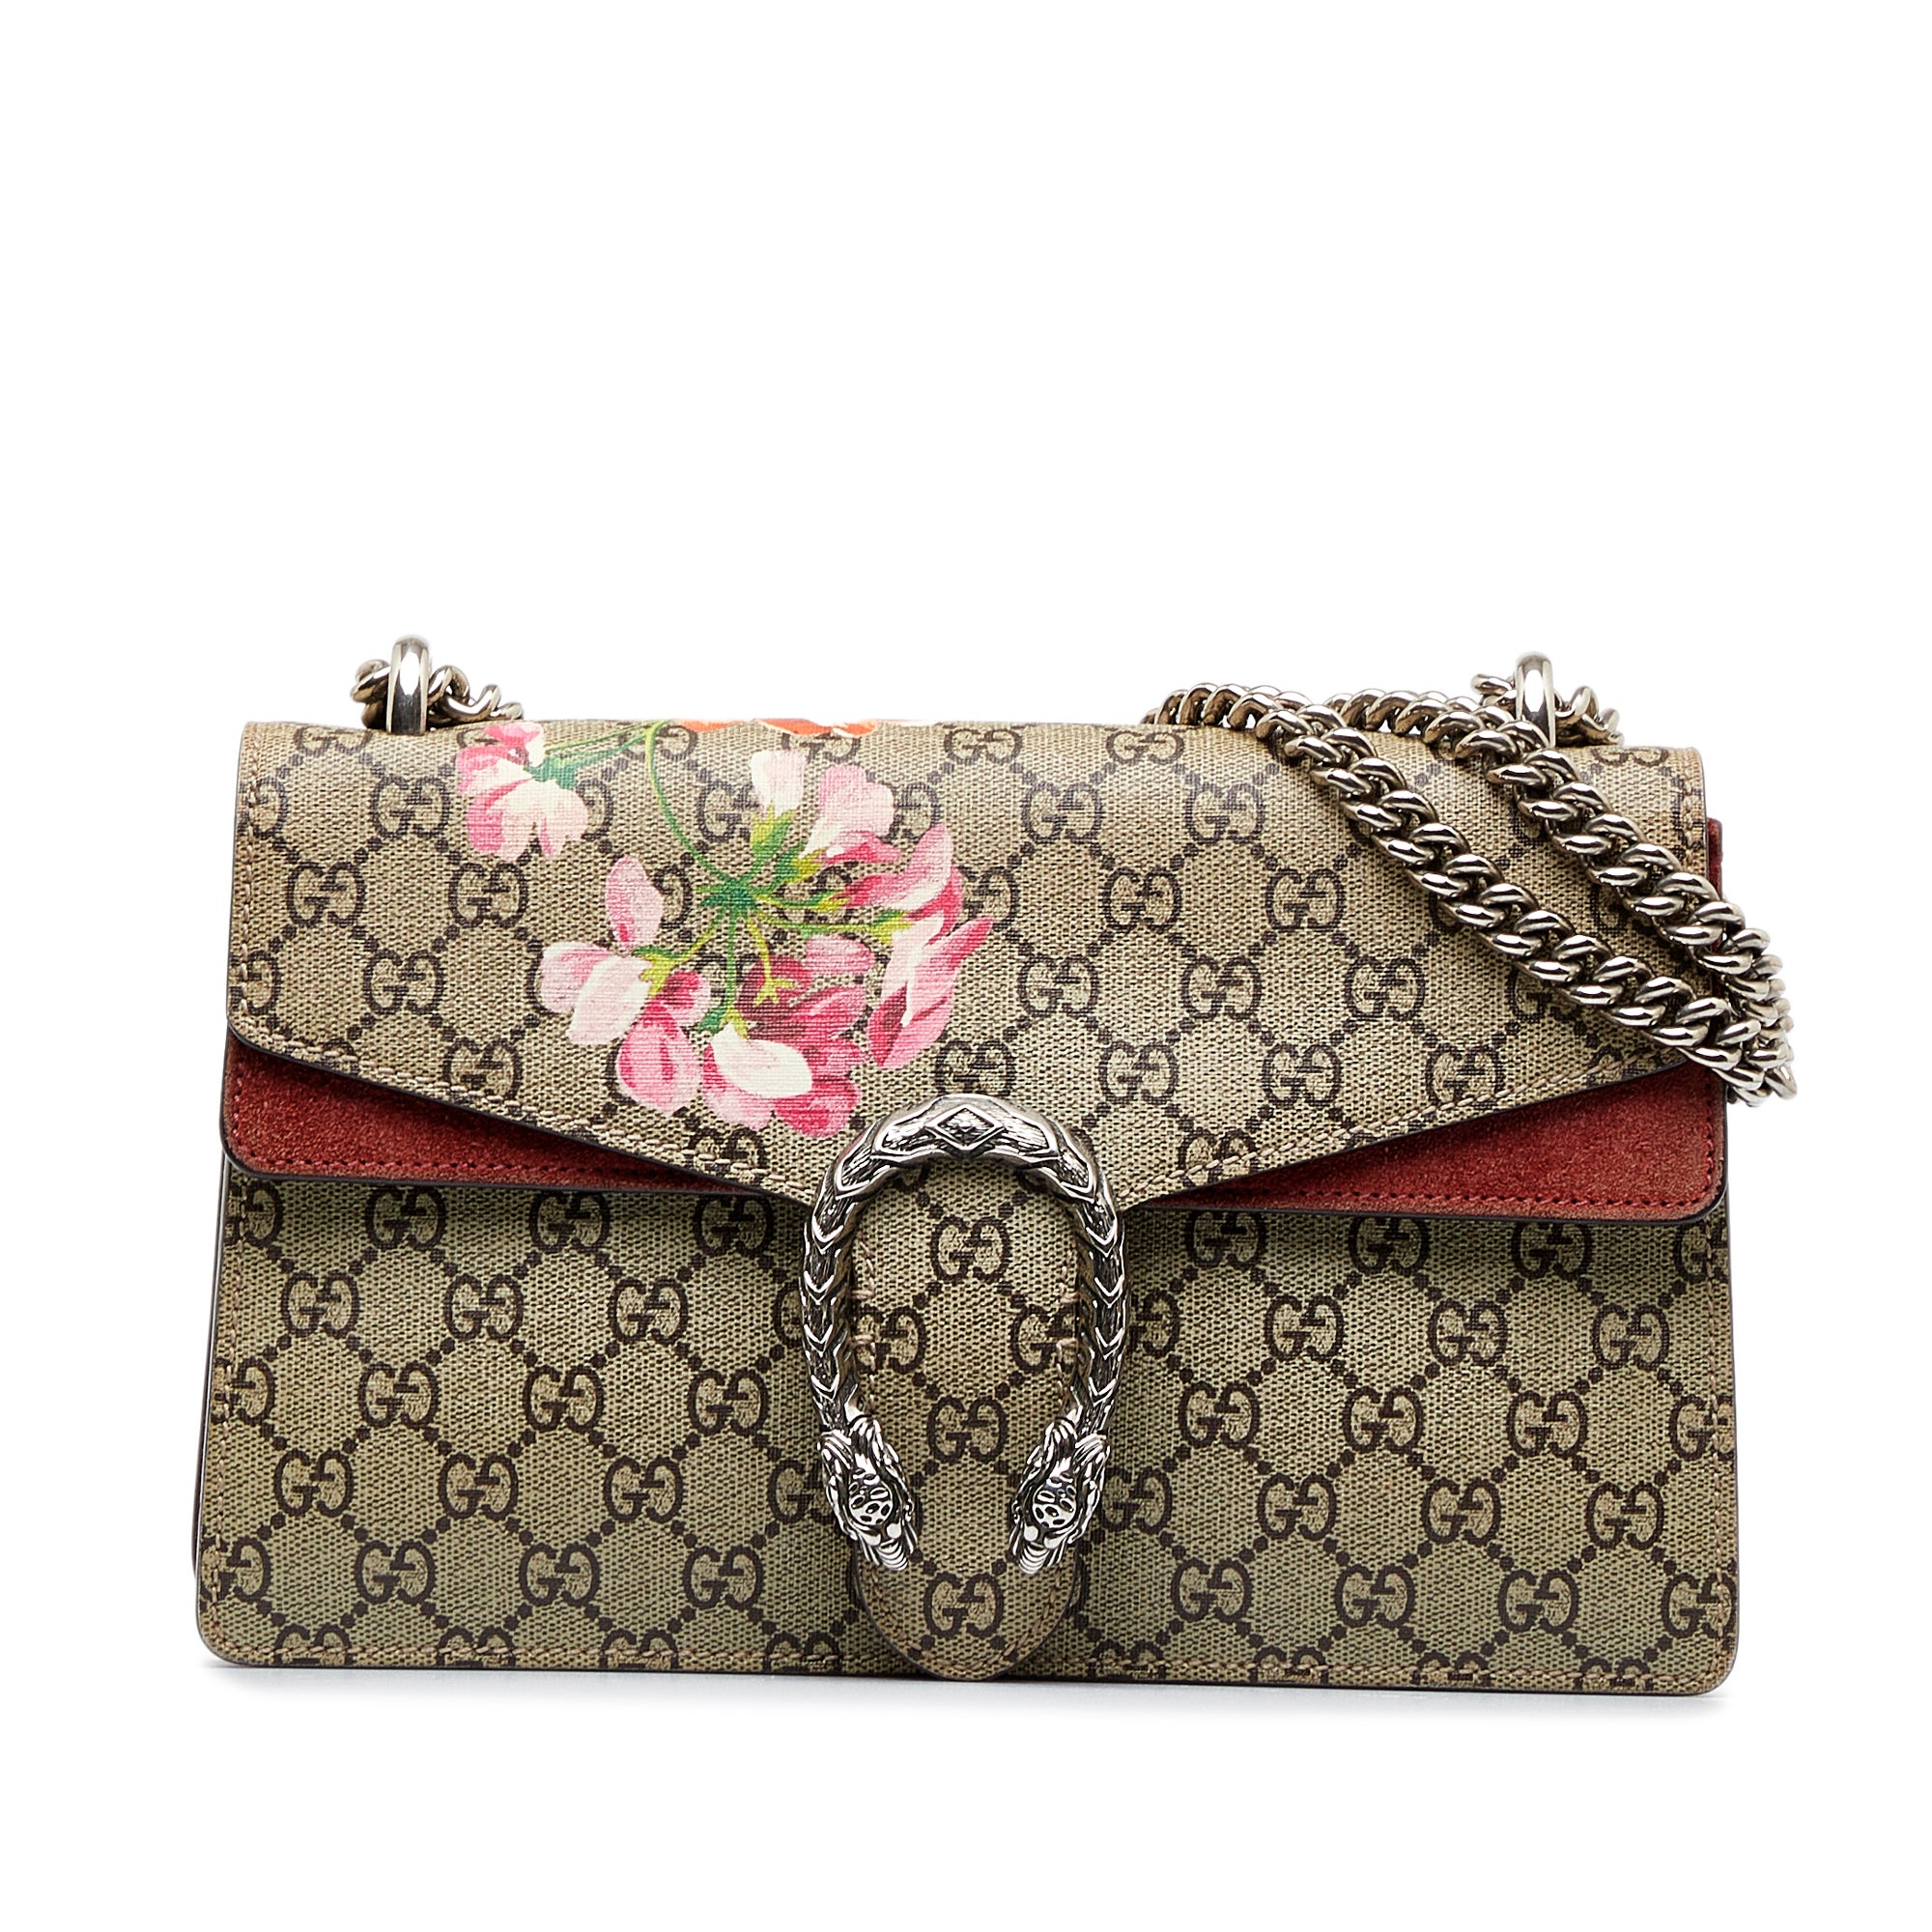 Gucci - Authenticated Dionysus Handbag - Cloth Multicolour for Women, Very Good Condition